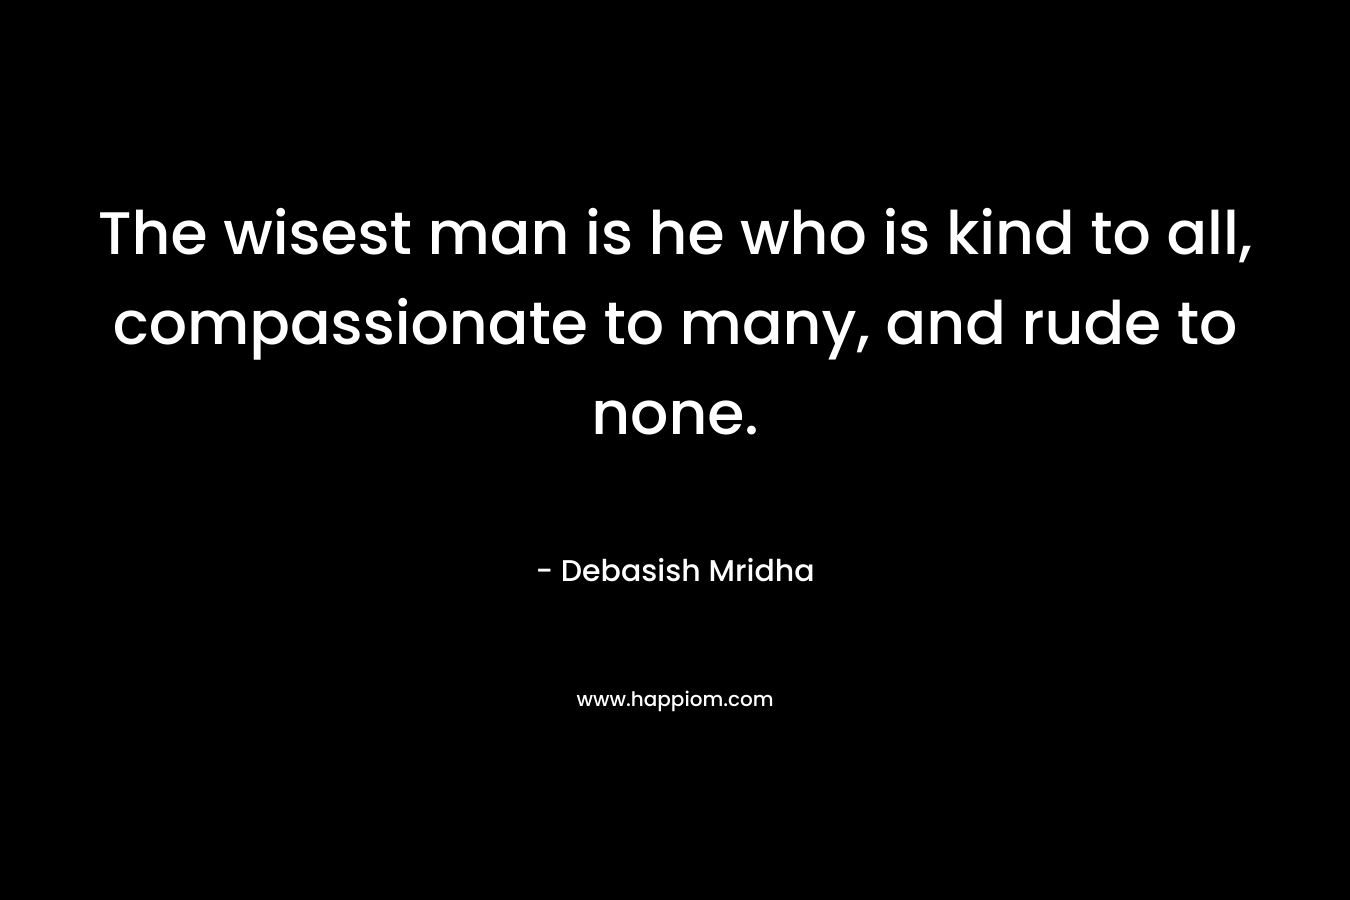 The wisest man is he who is kind to all, compassionate to many, and rude to none.